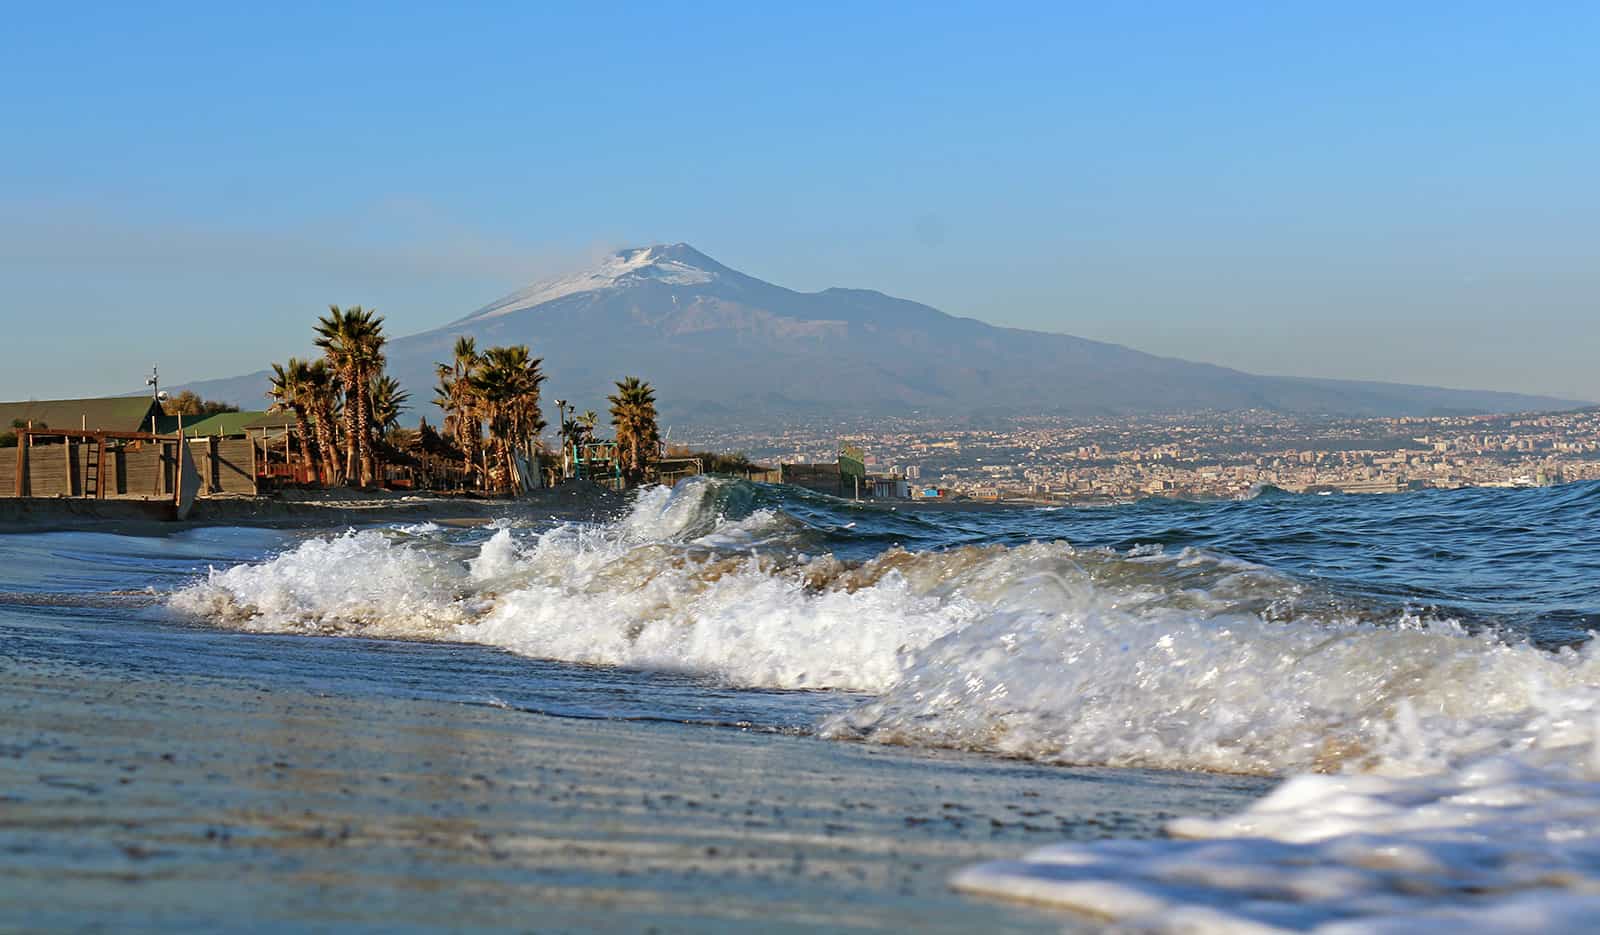 Playa Catania and Mount Etna in the background.